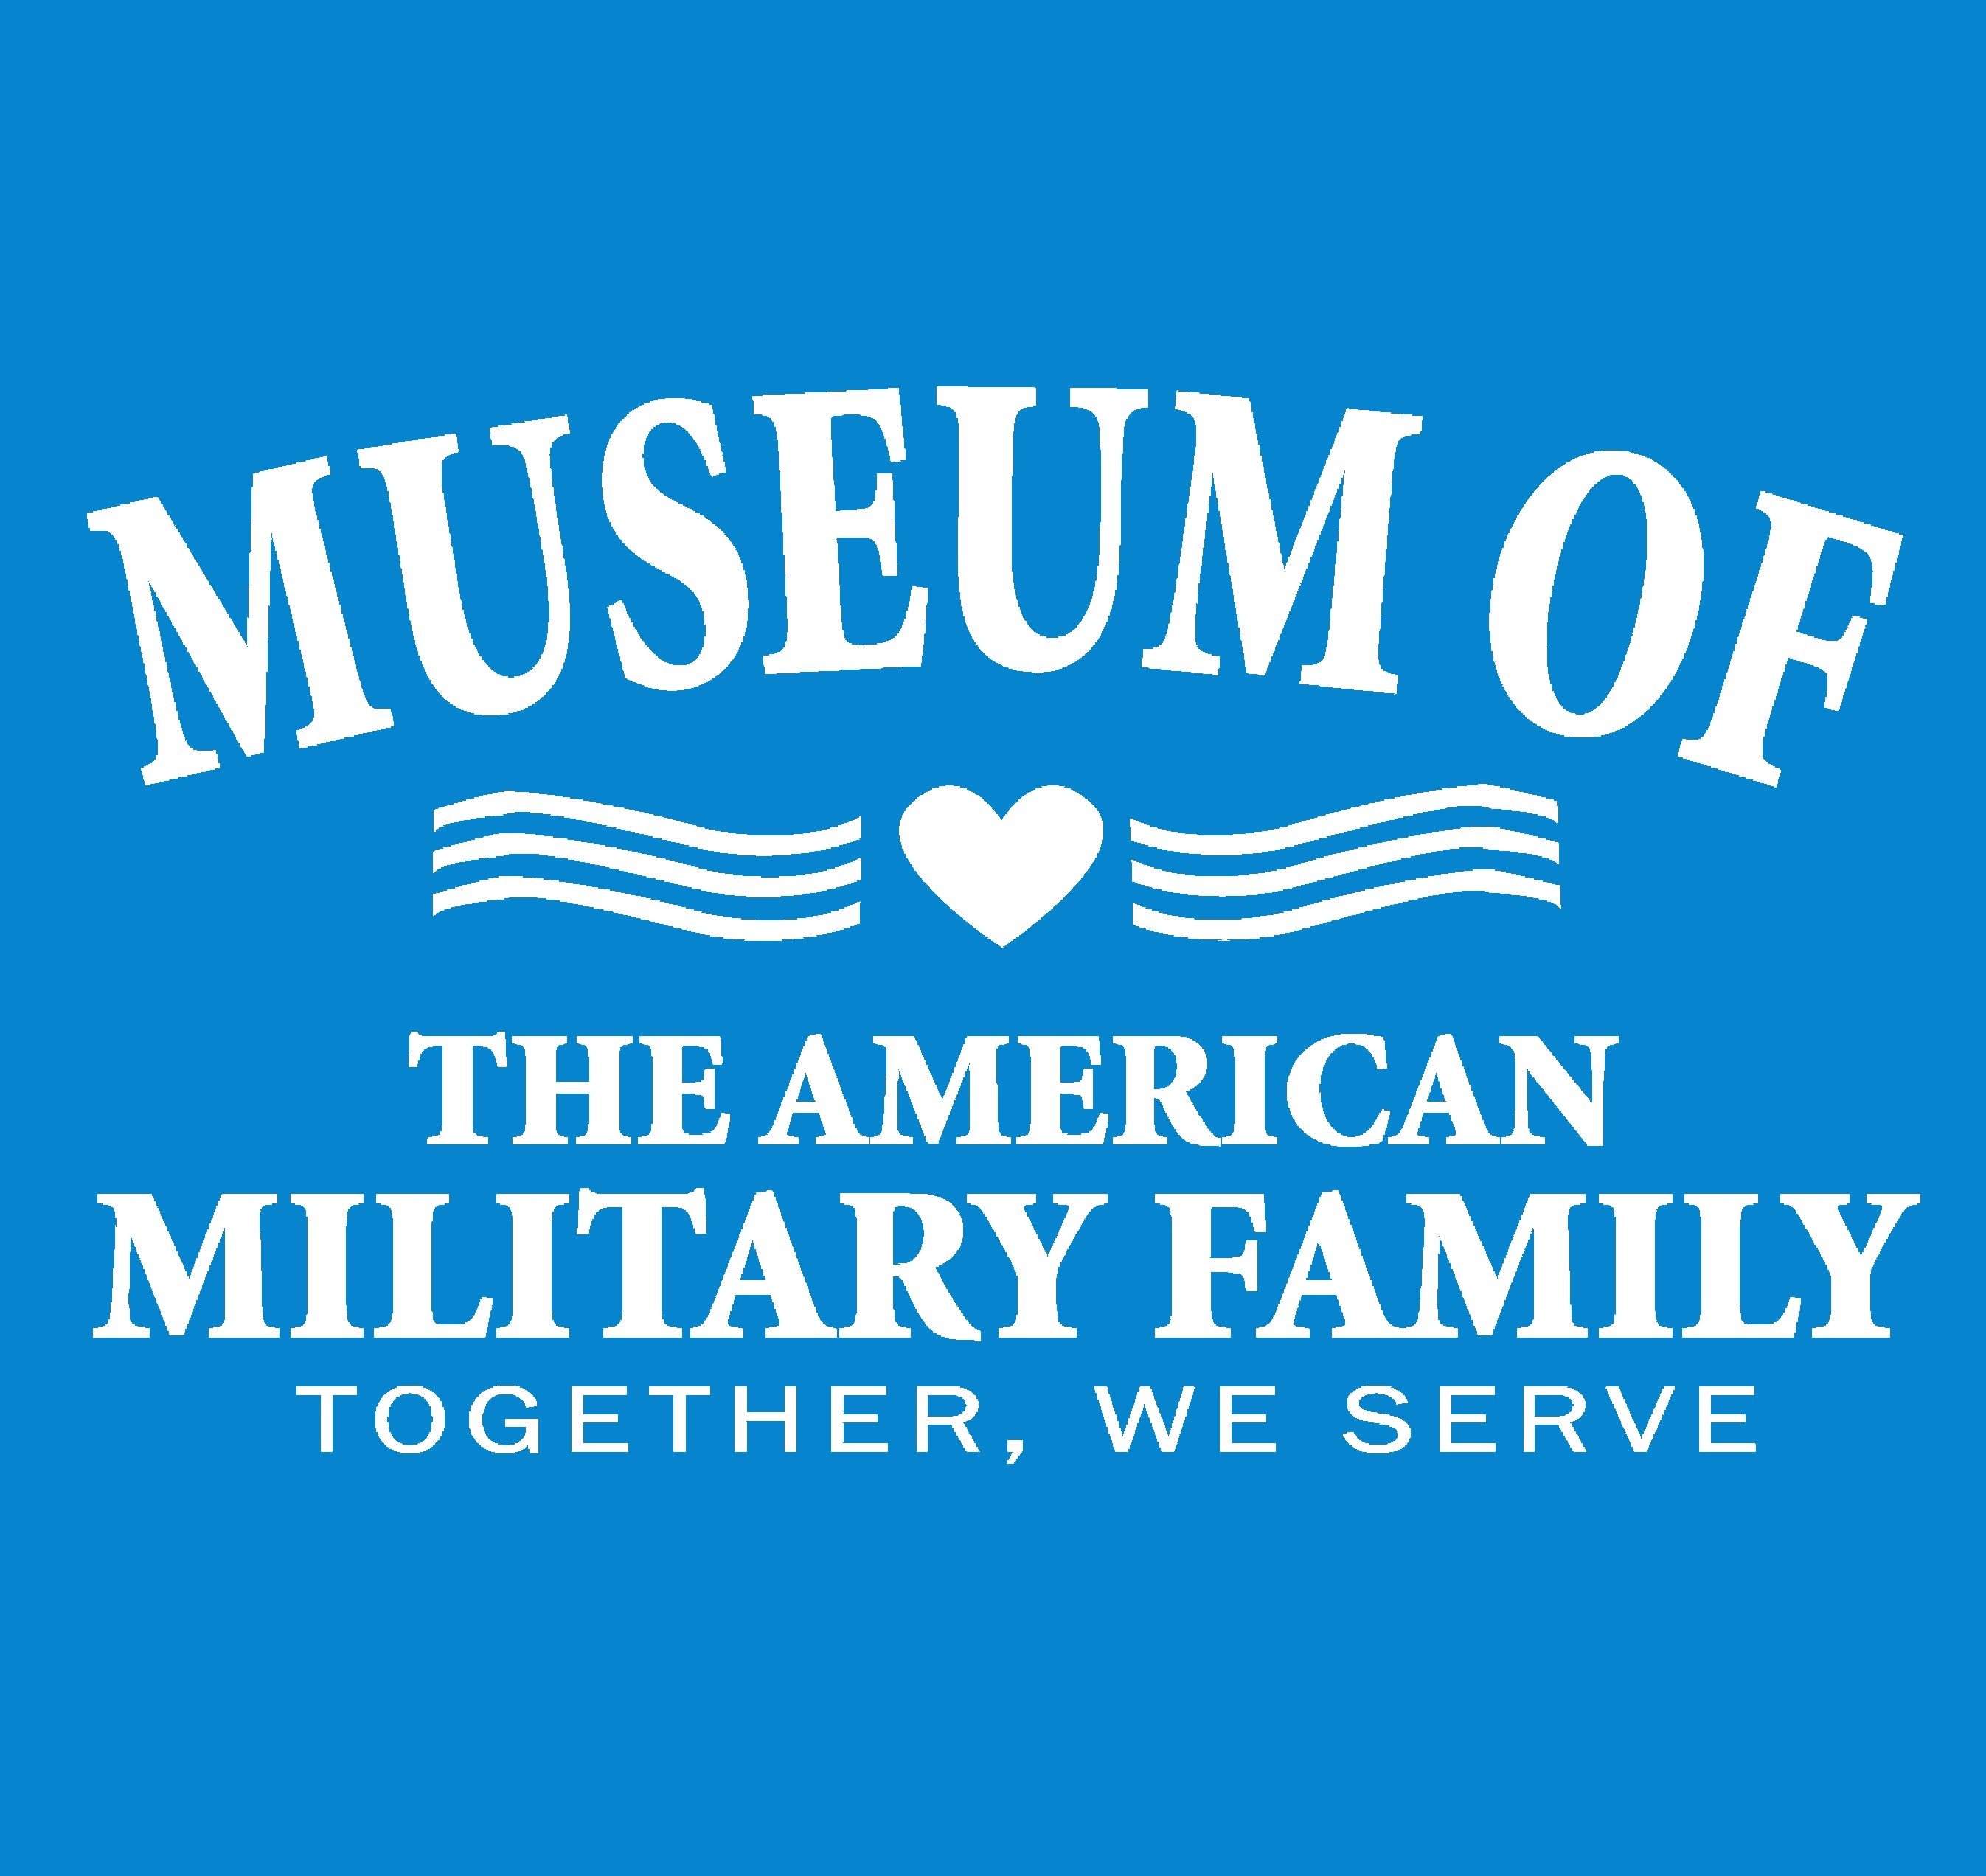 Military Family Museum 